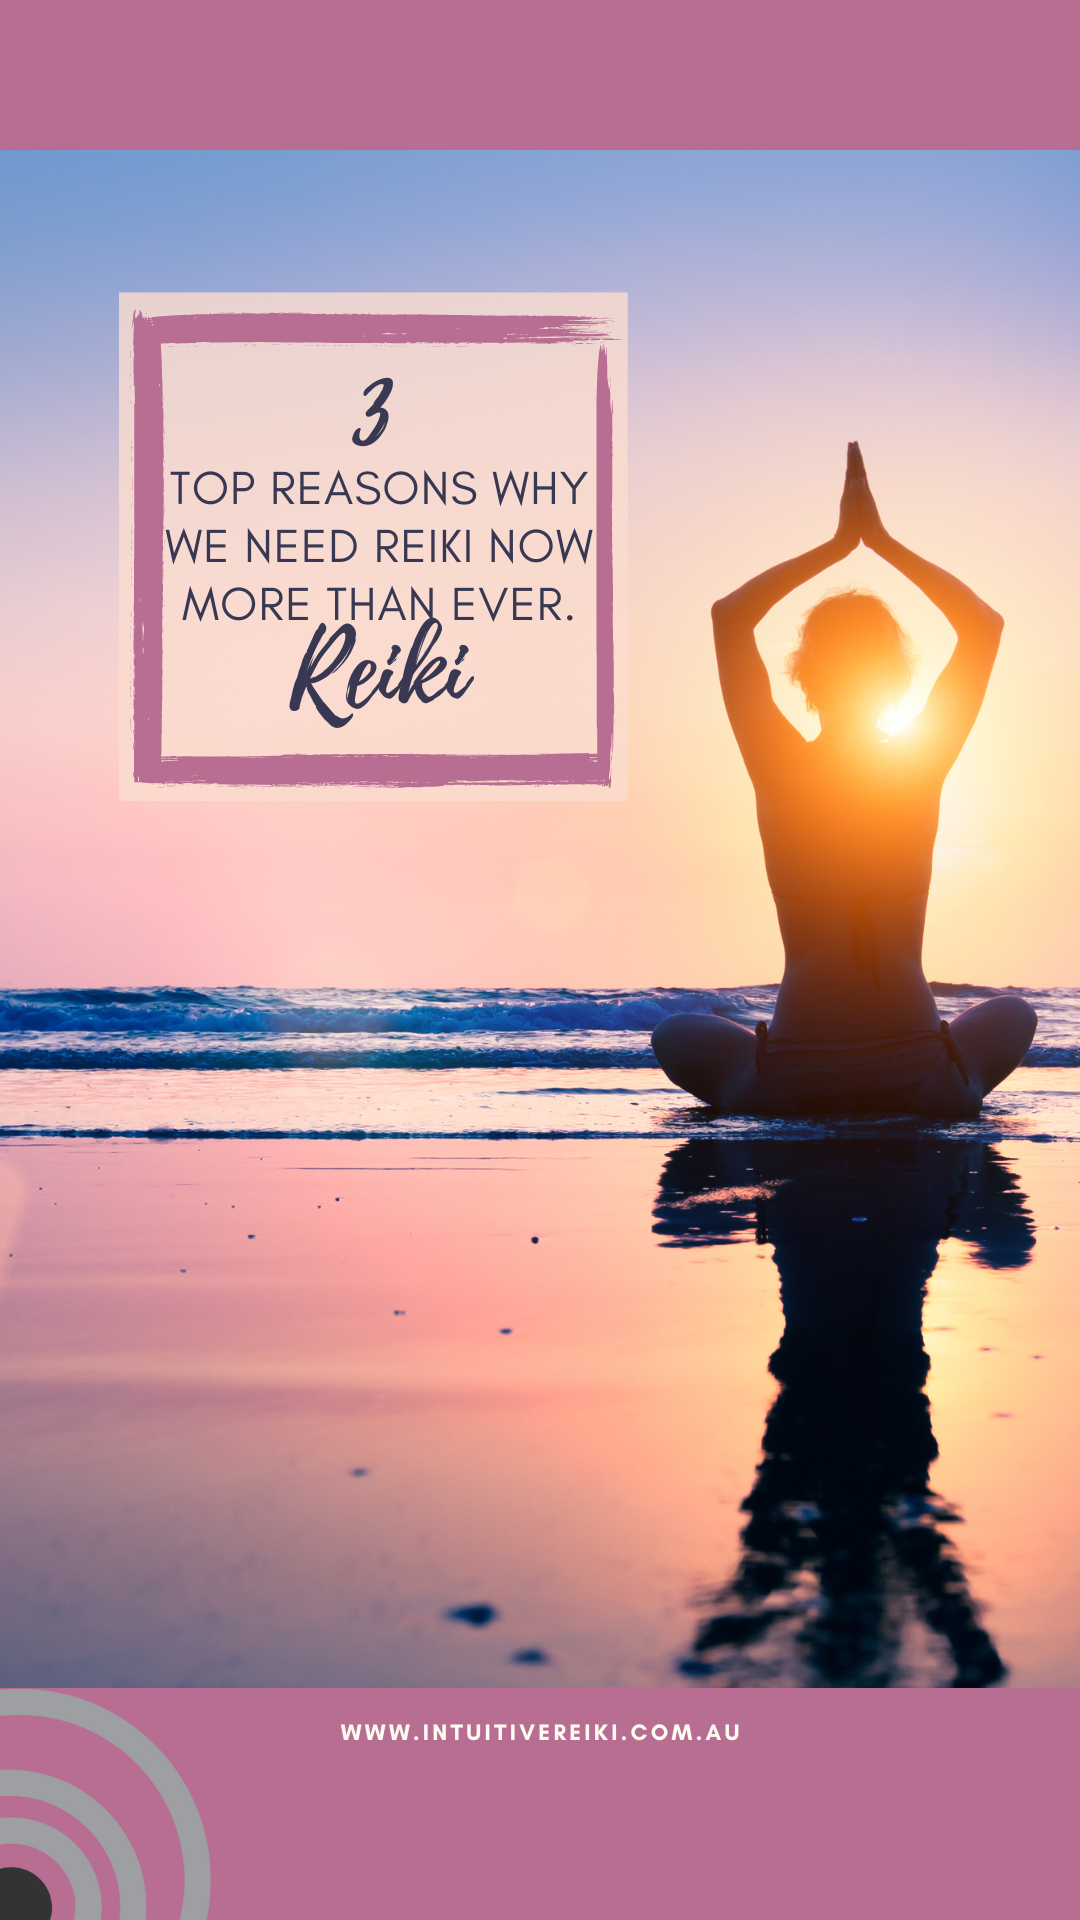 My top 3 reasons why we need Reiki now more than ever. 1. We are craving human touch. With my husband recently having covid the incidental touch was the thing we missed the most! 